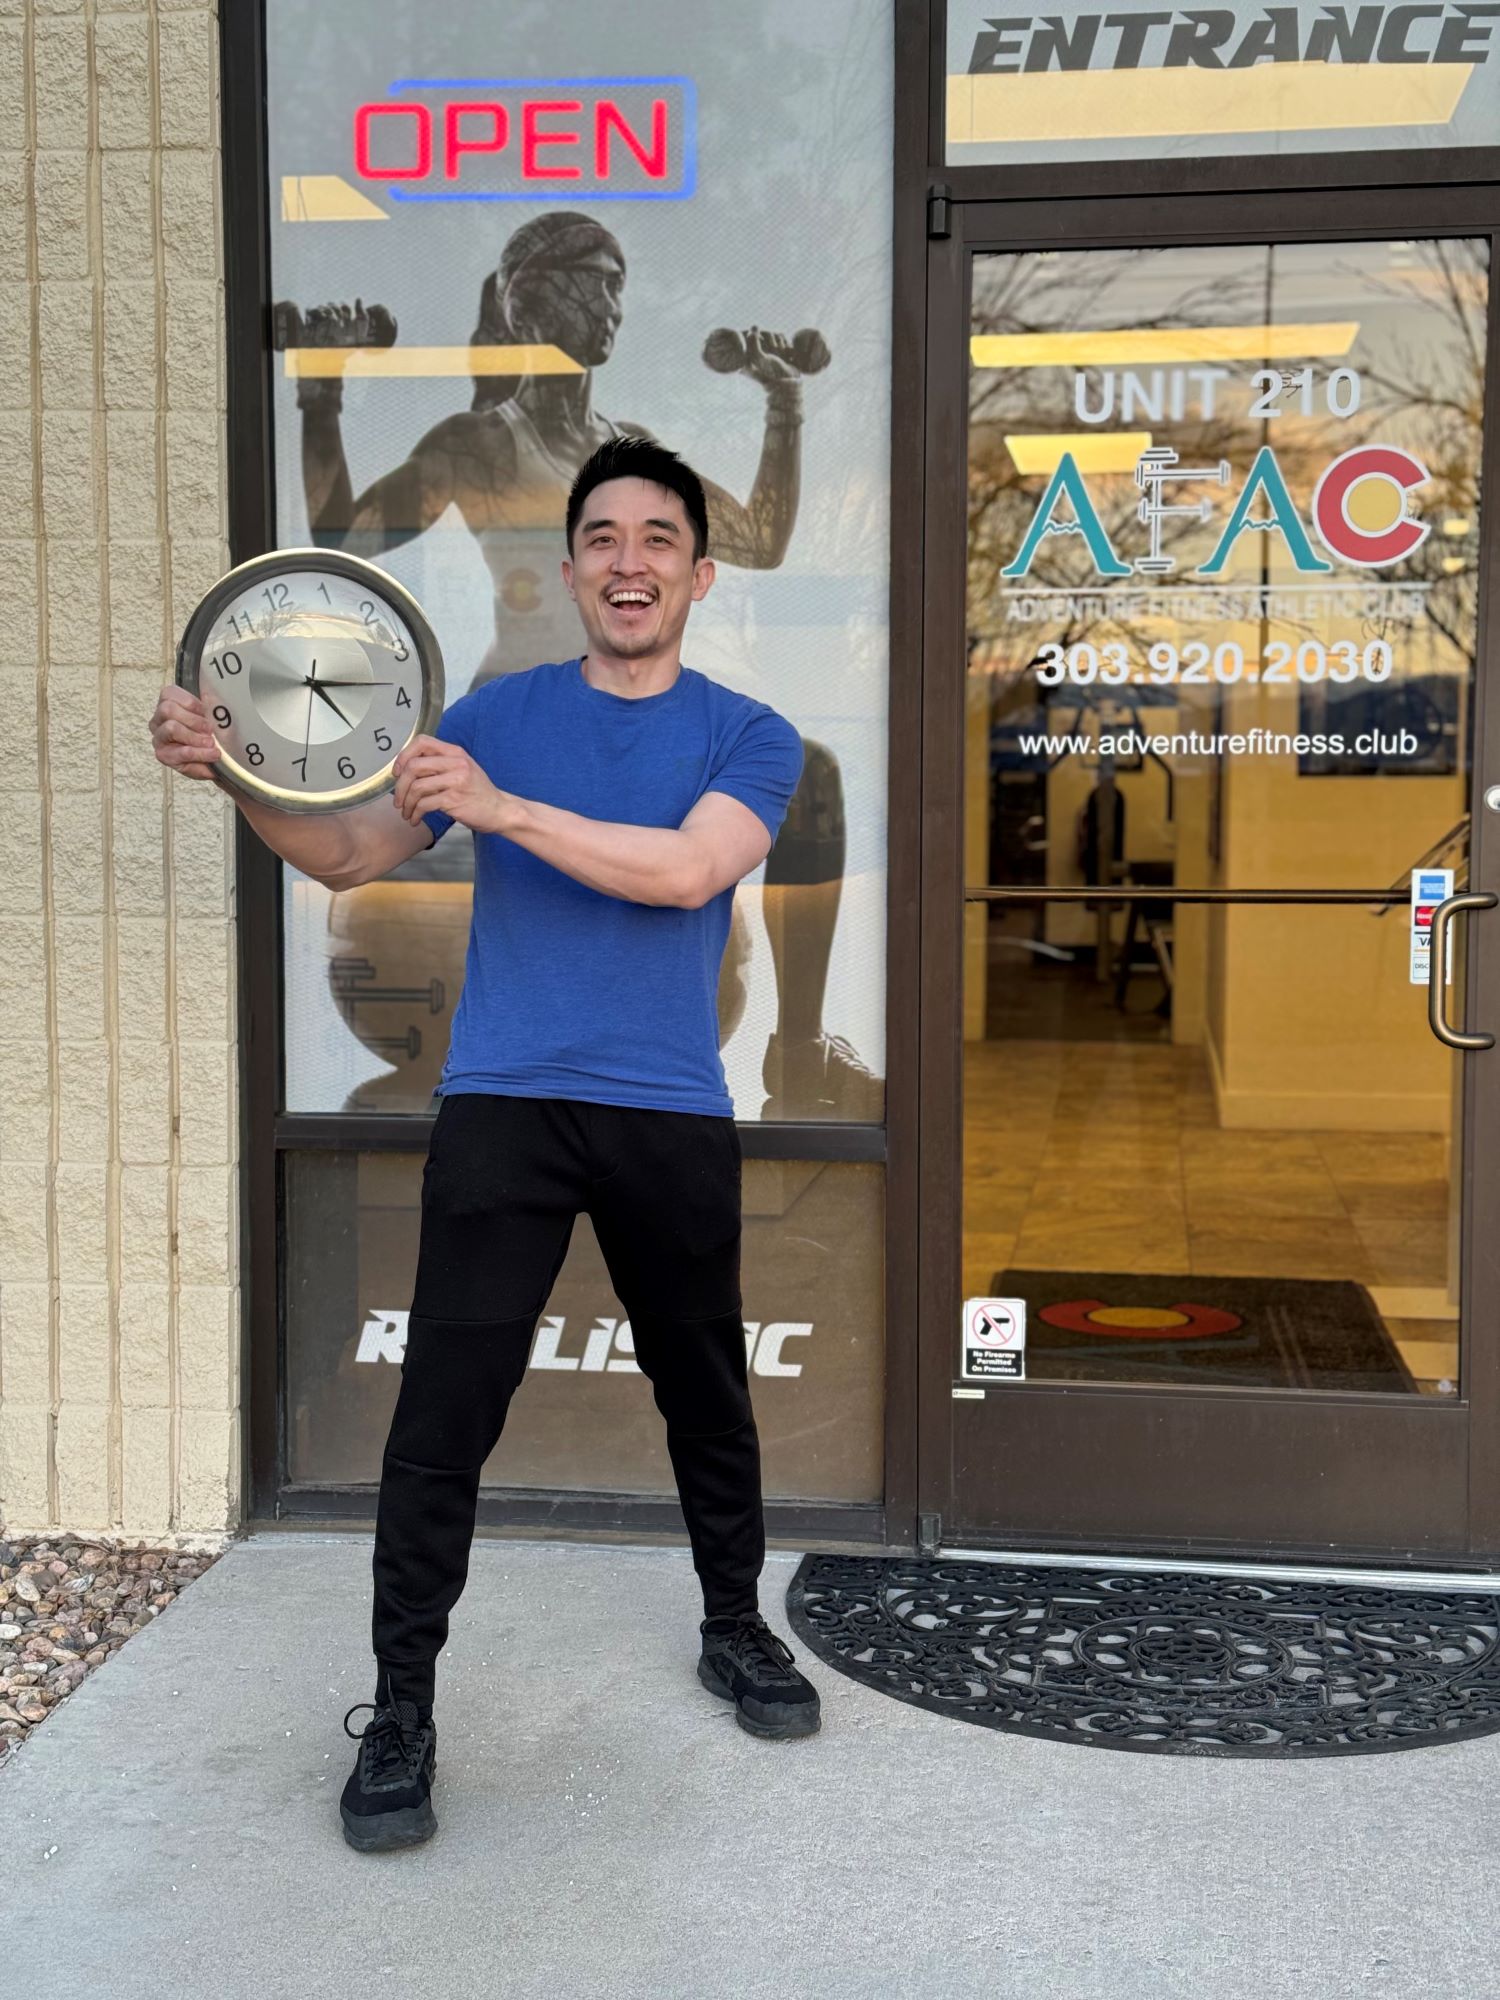 Man smiling and holding clock while standing in front of AFAC gym in Thornton CO